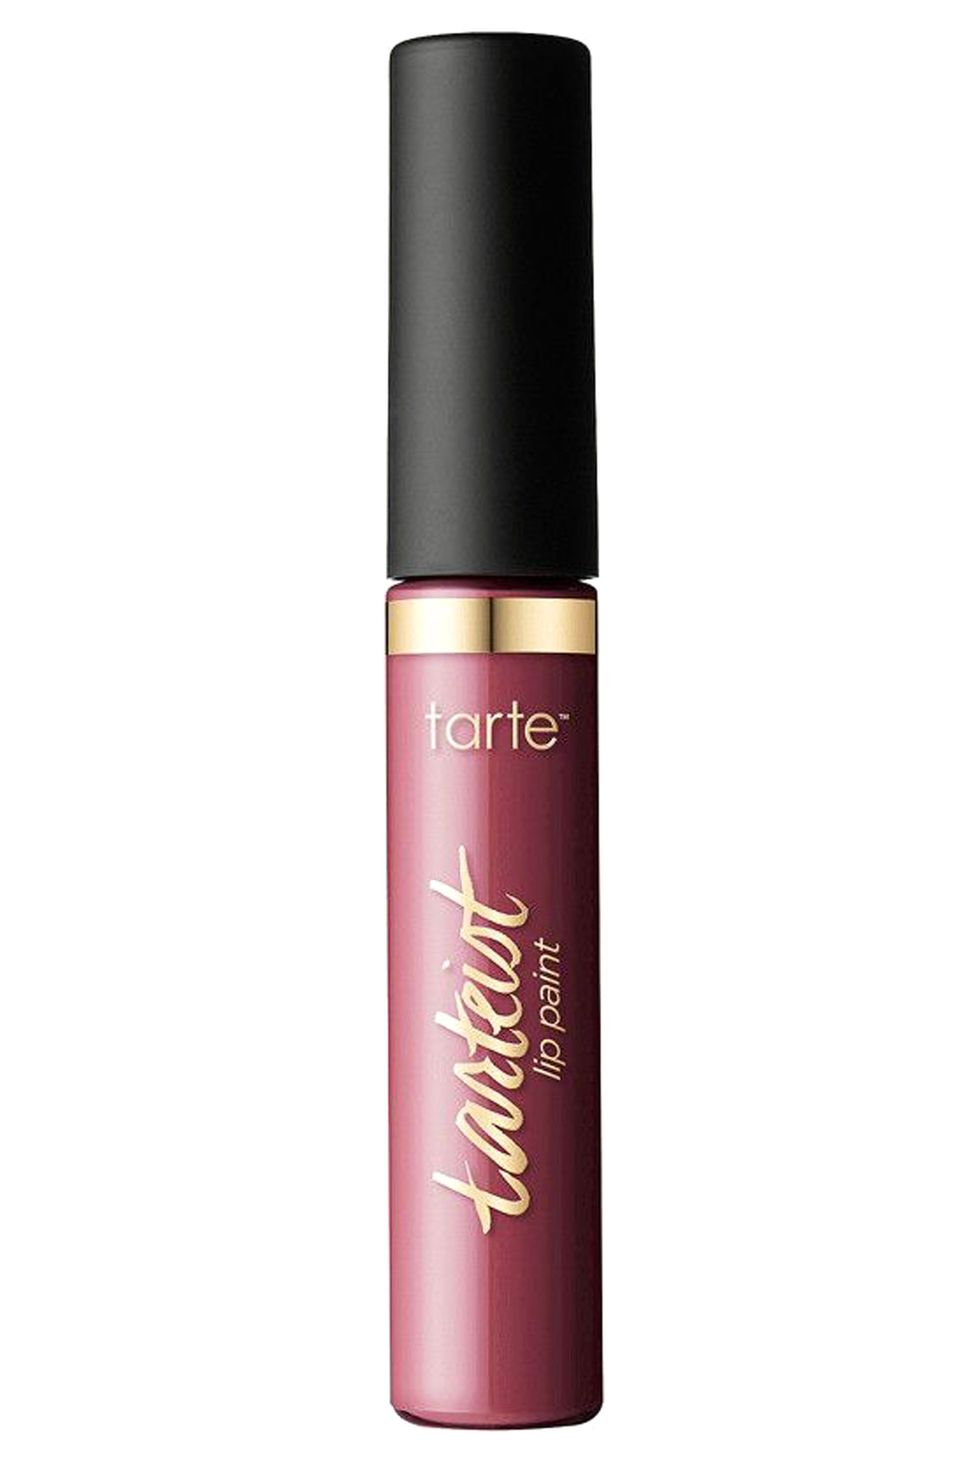 If You Want a Liquid Lipstick That Dries Lightening-Fast 